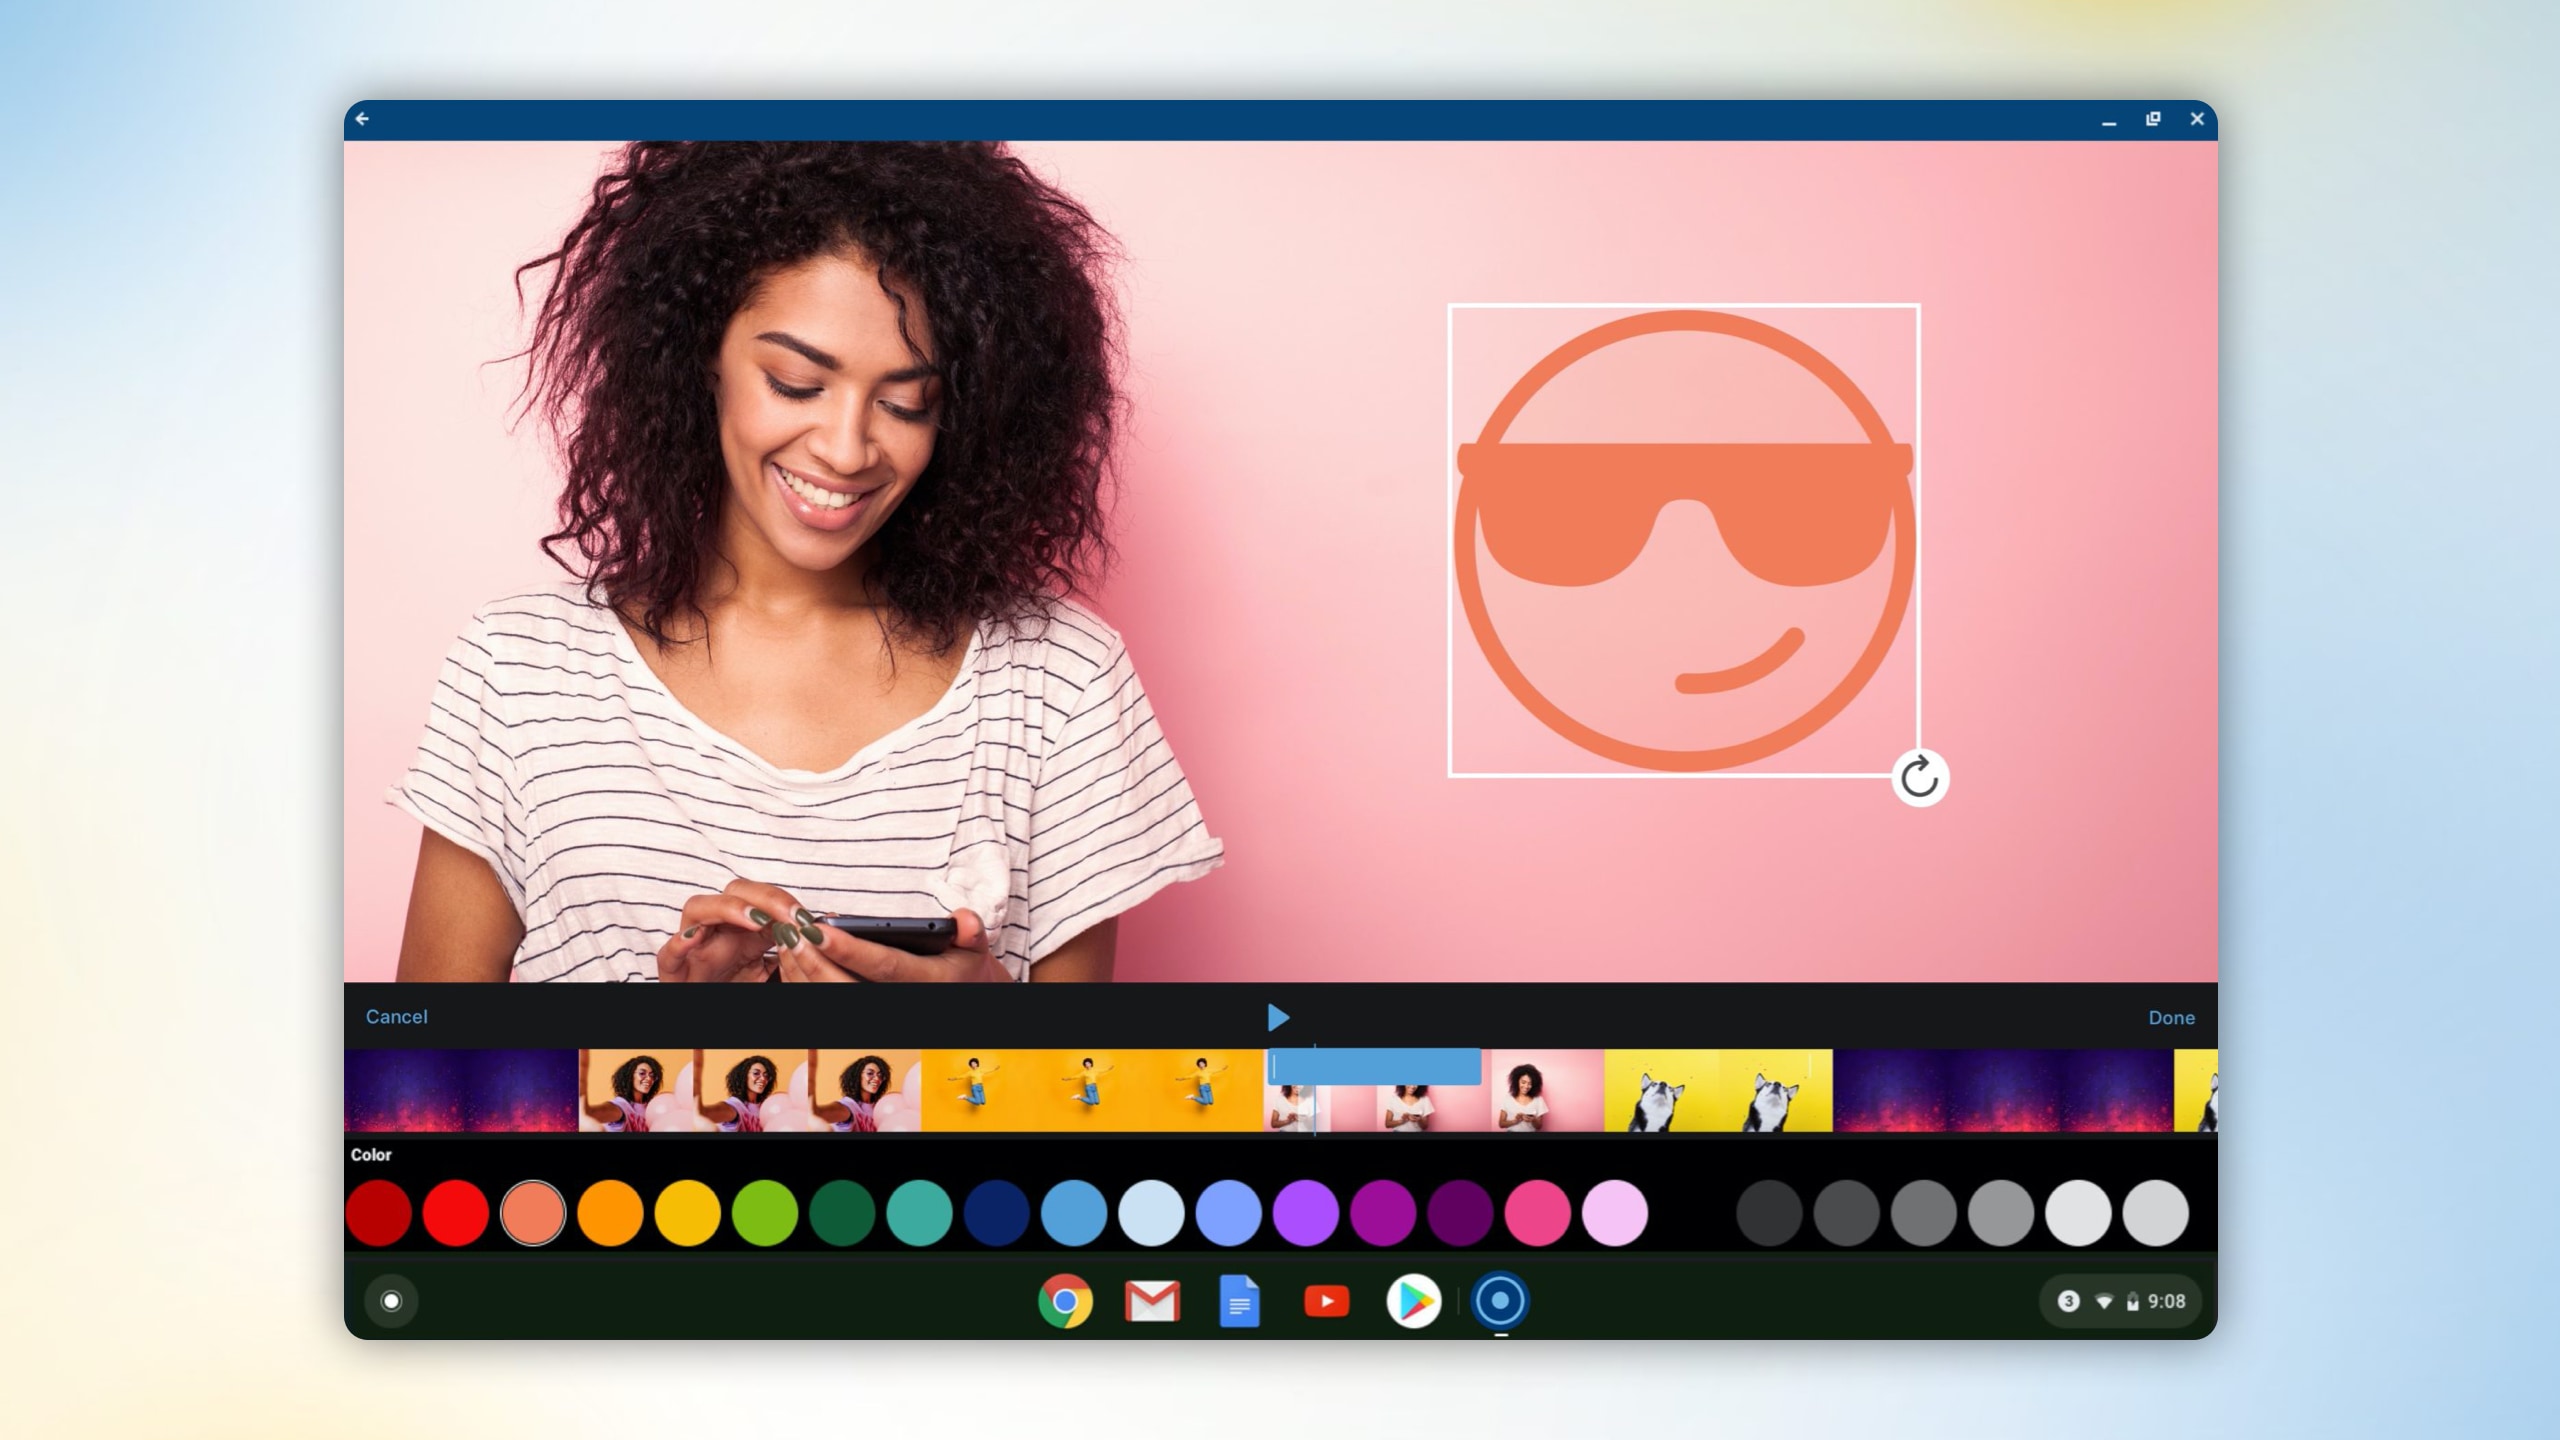 Overview of the Chromebook Video Editor